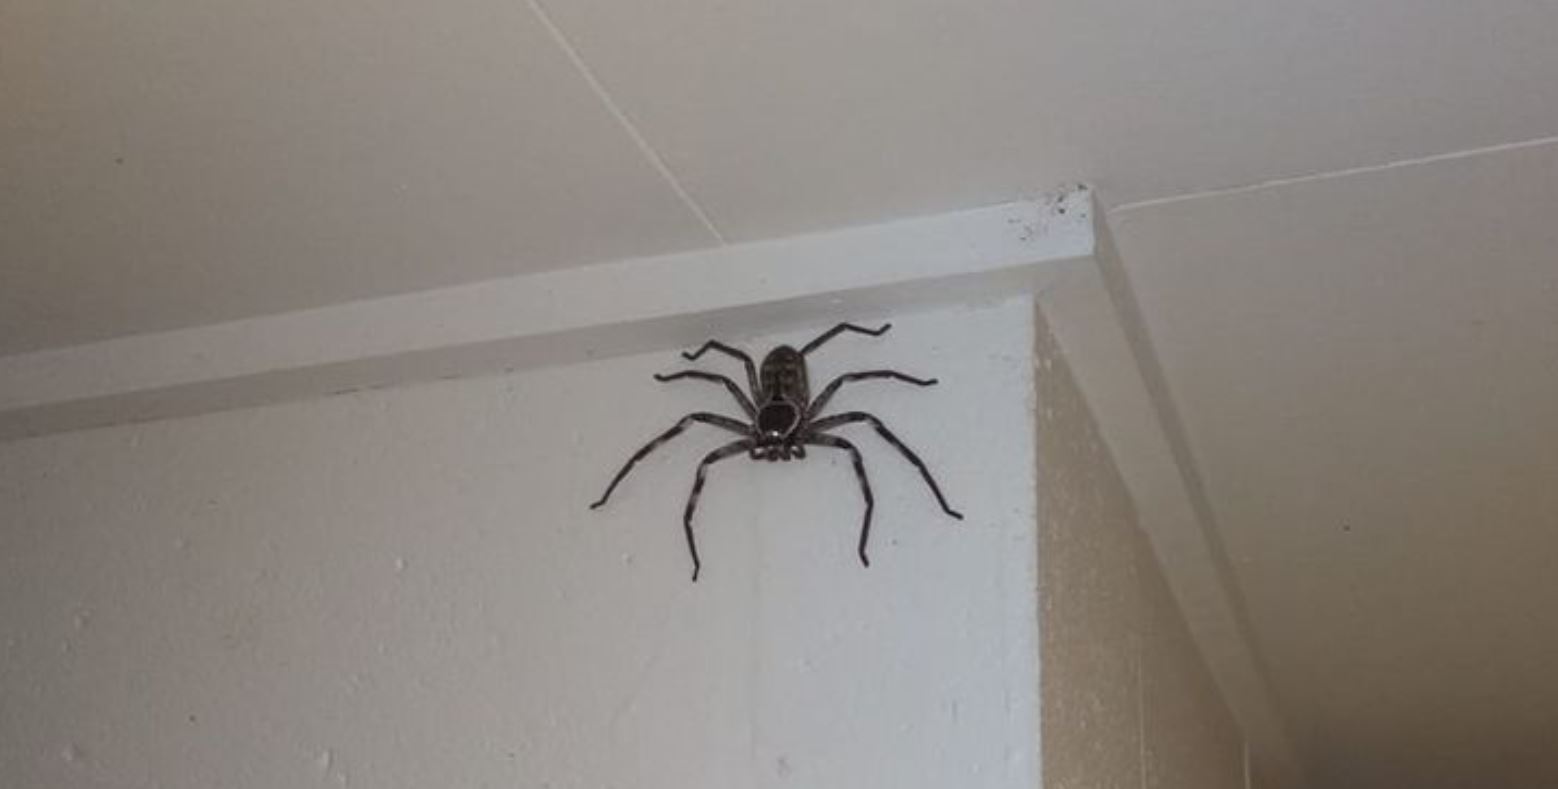 Aussie bloke’s been living with this humongous spider for the last year